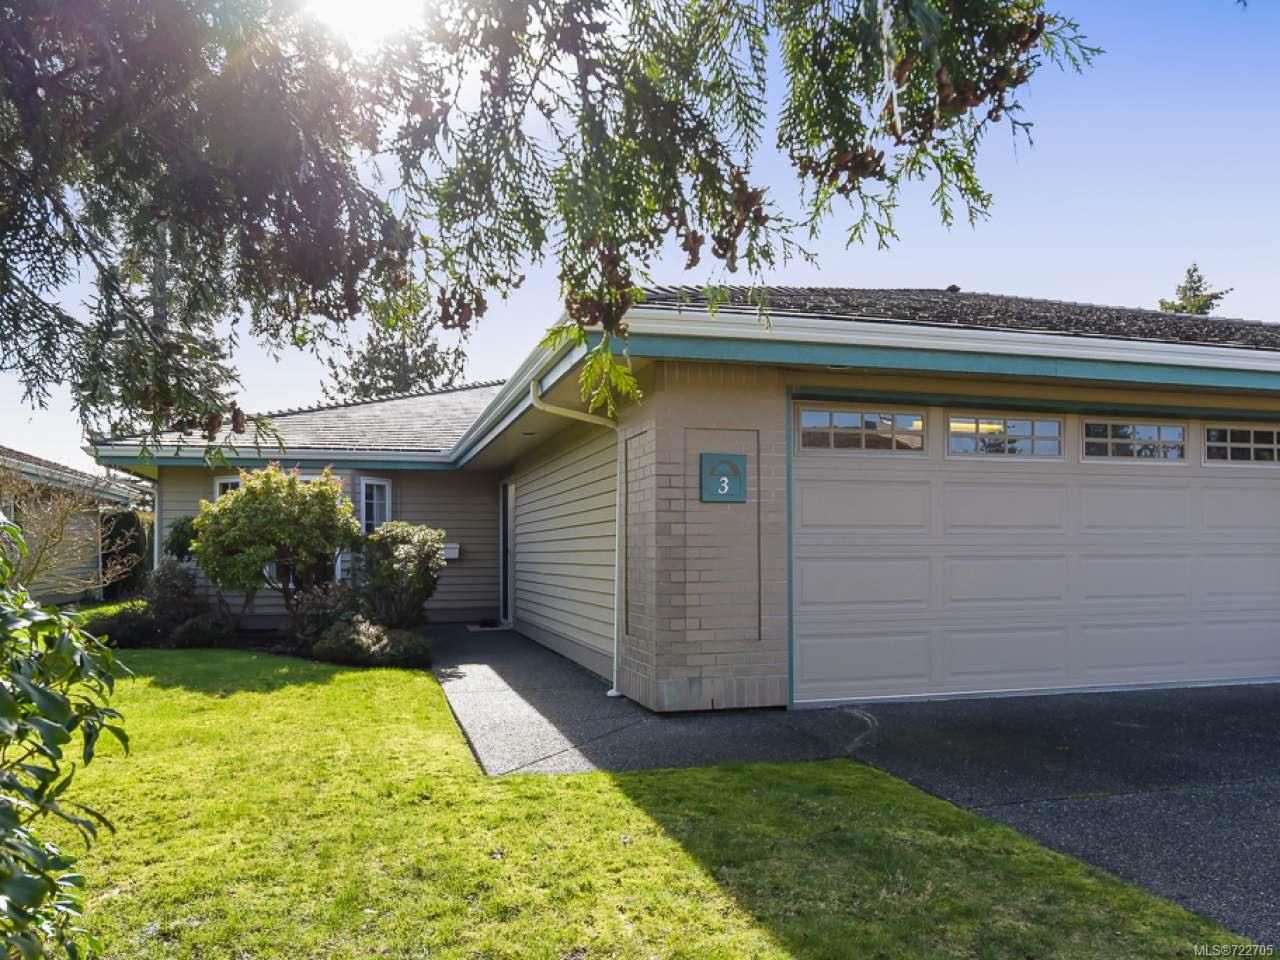 I have sold a property at 3 3100 Kensington Cres in COURTENAY
